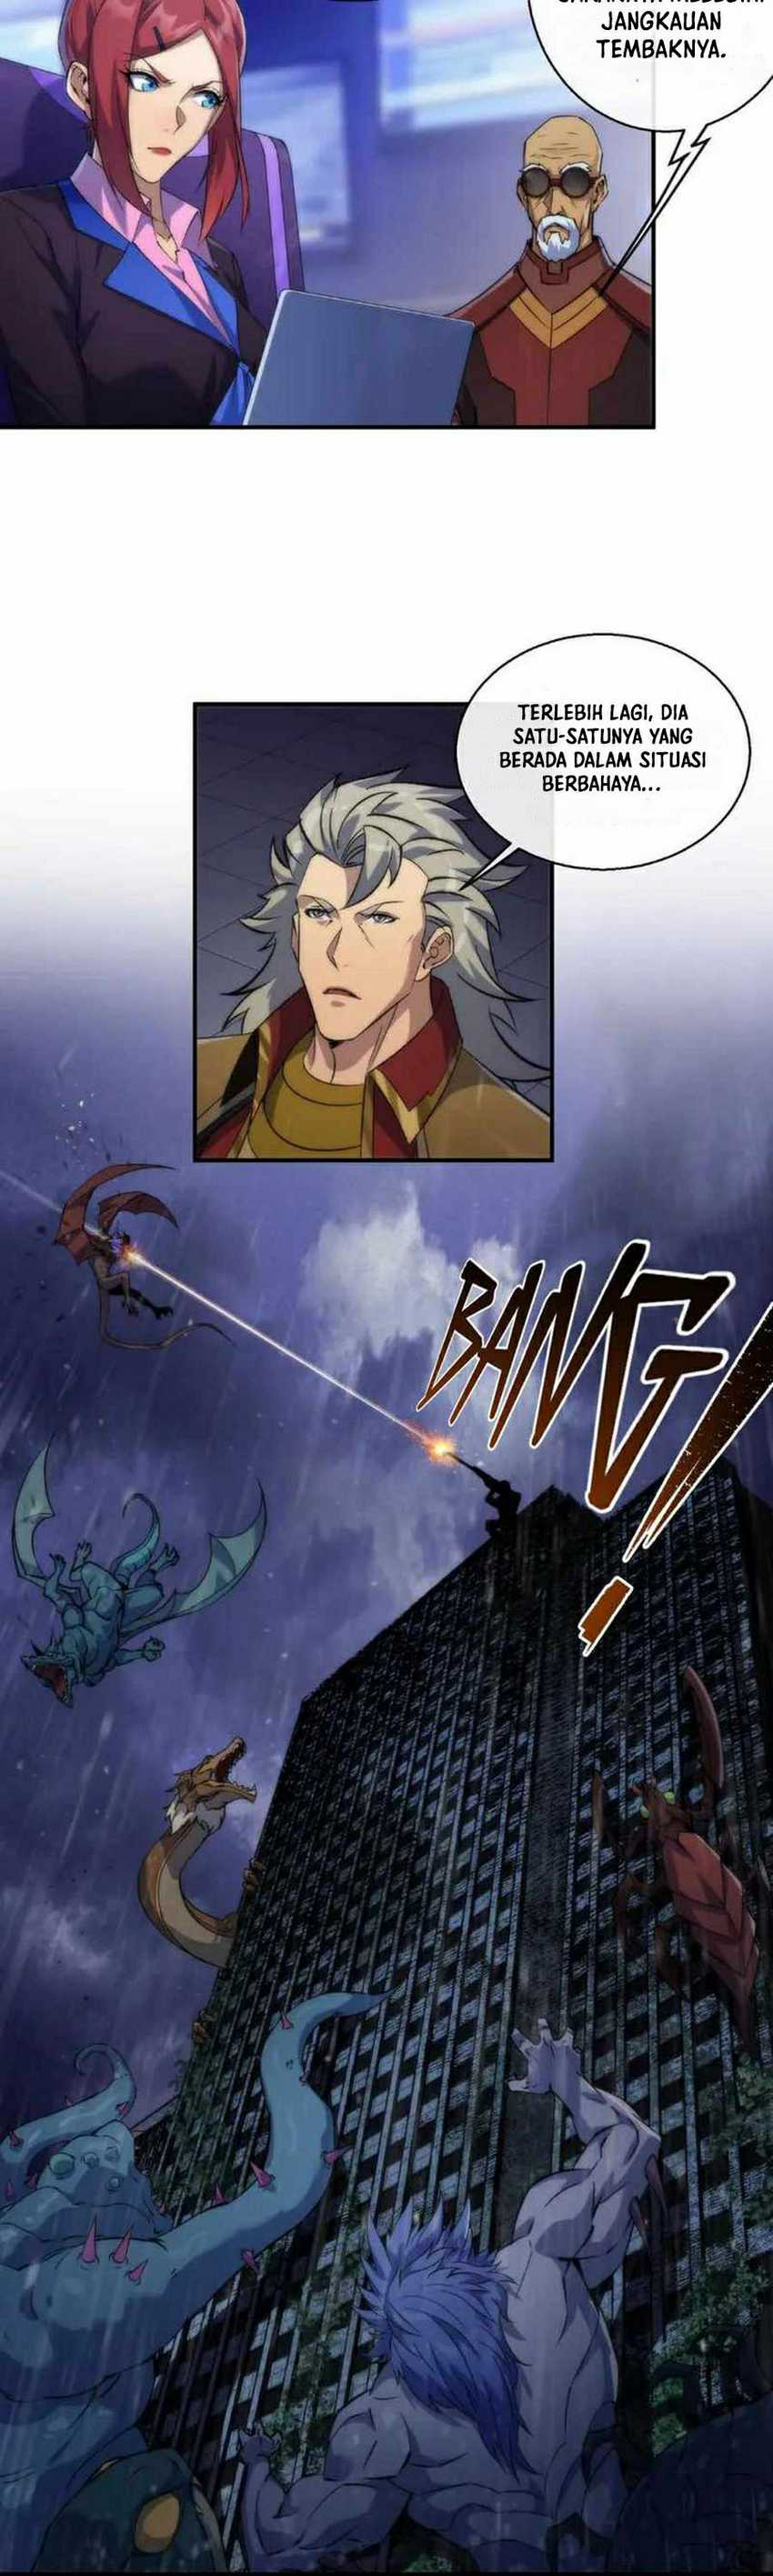 King of Runes Chapter 55